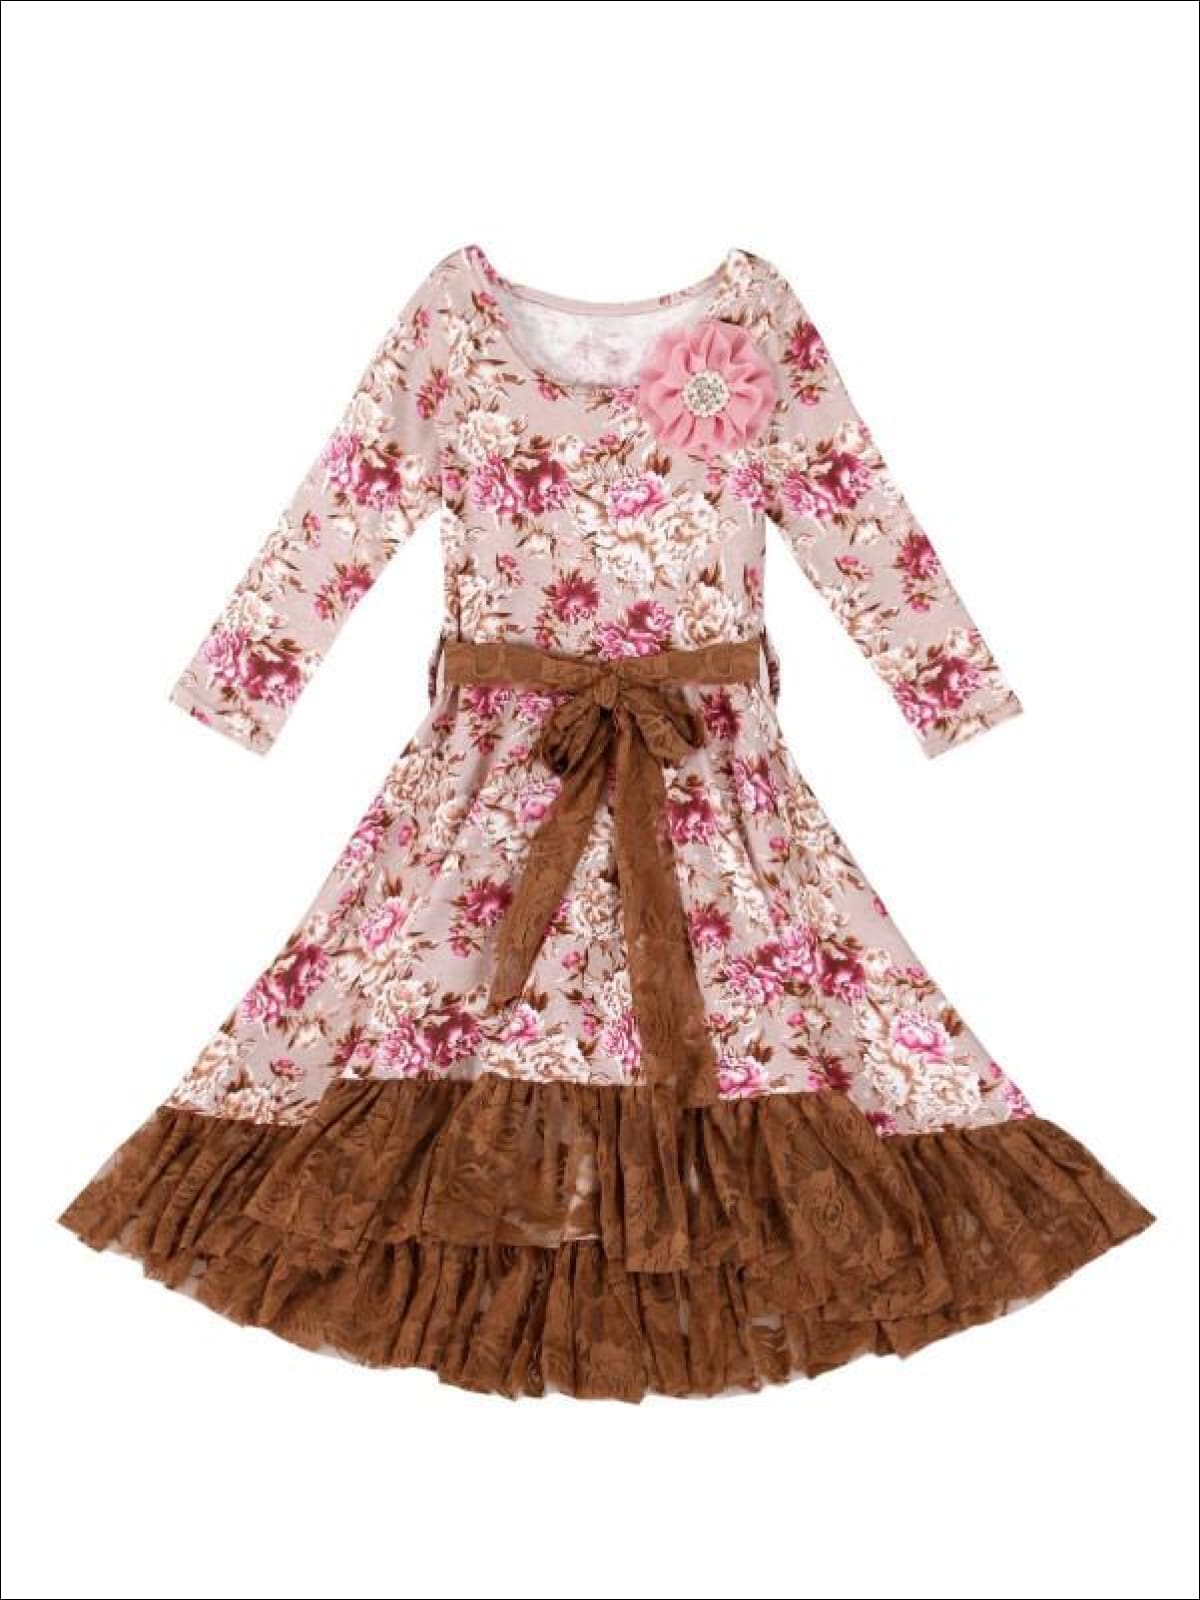 Girls Fall Flower Twirl Dress with Lace Ruffle & Sash - Taupe / 2T-3T - Girls Spring Dressy Dress